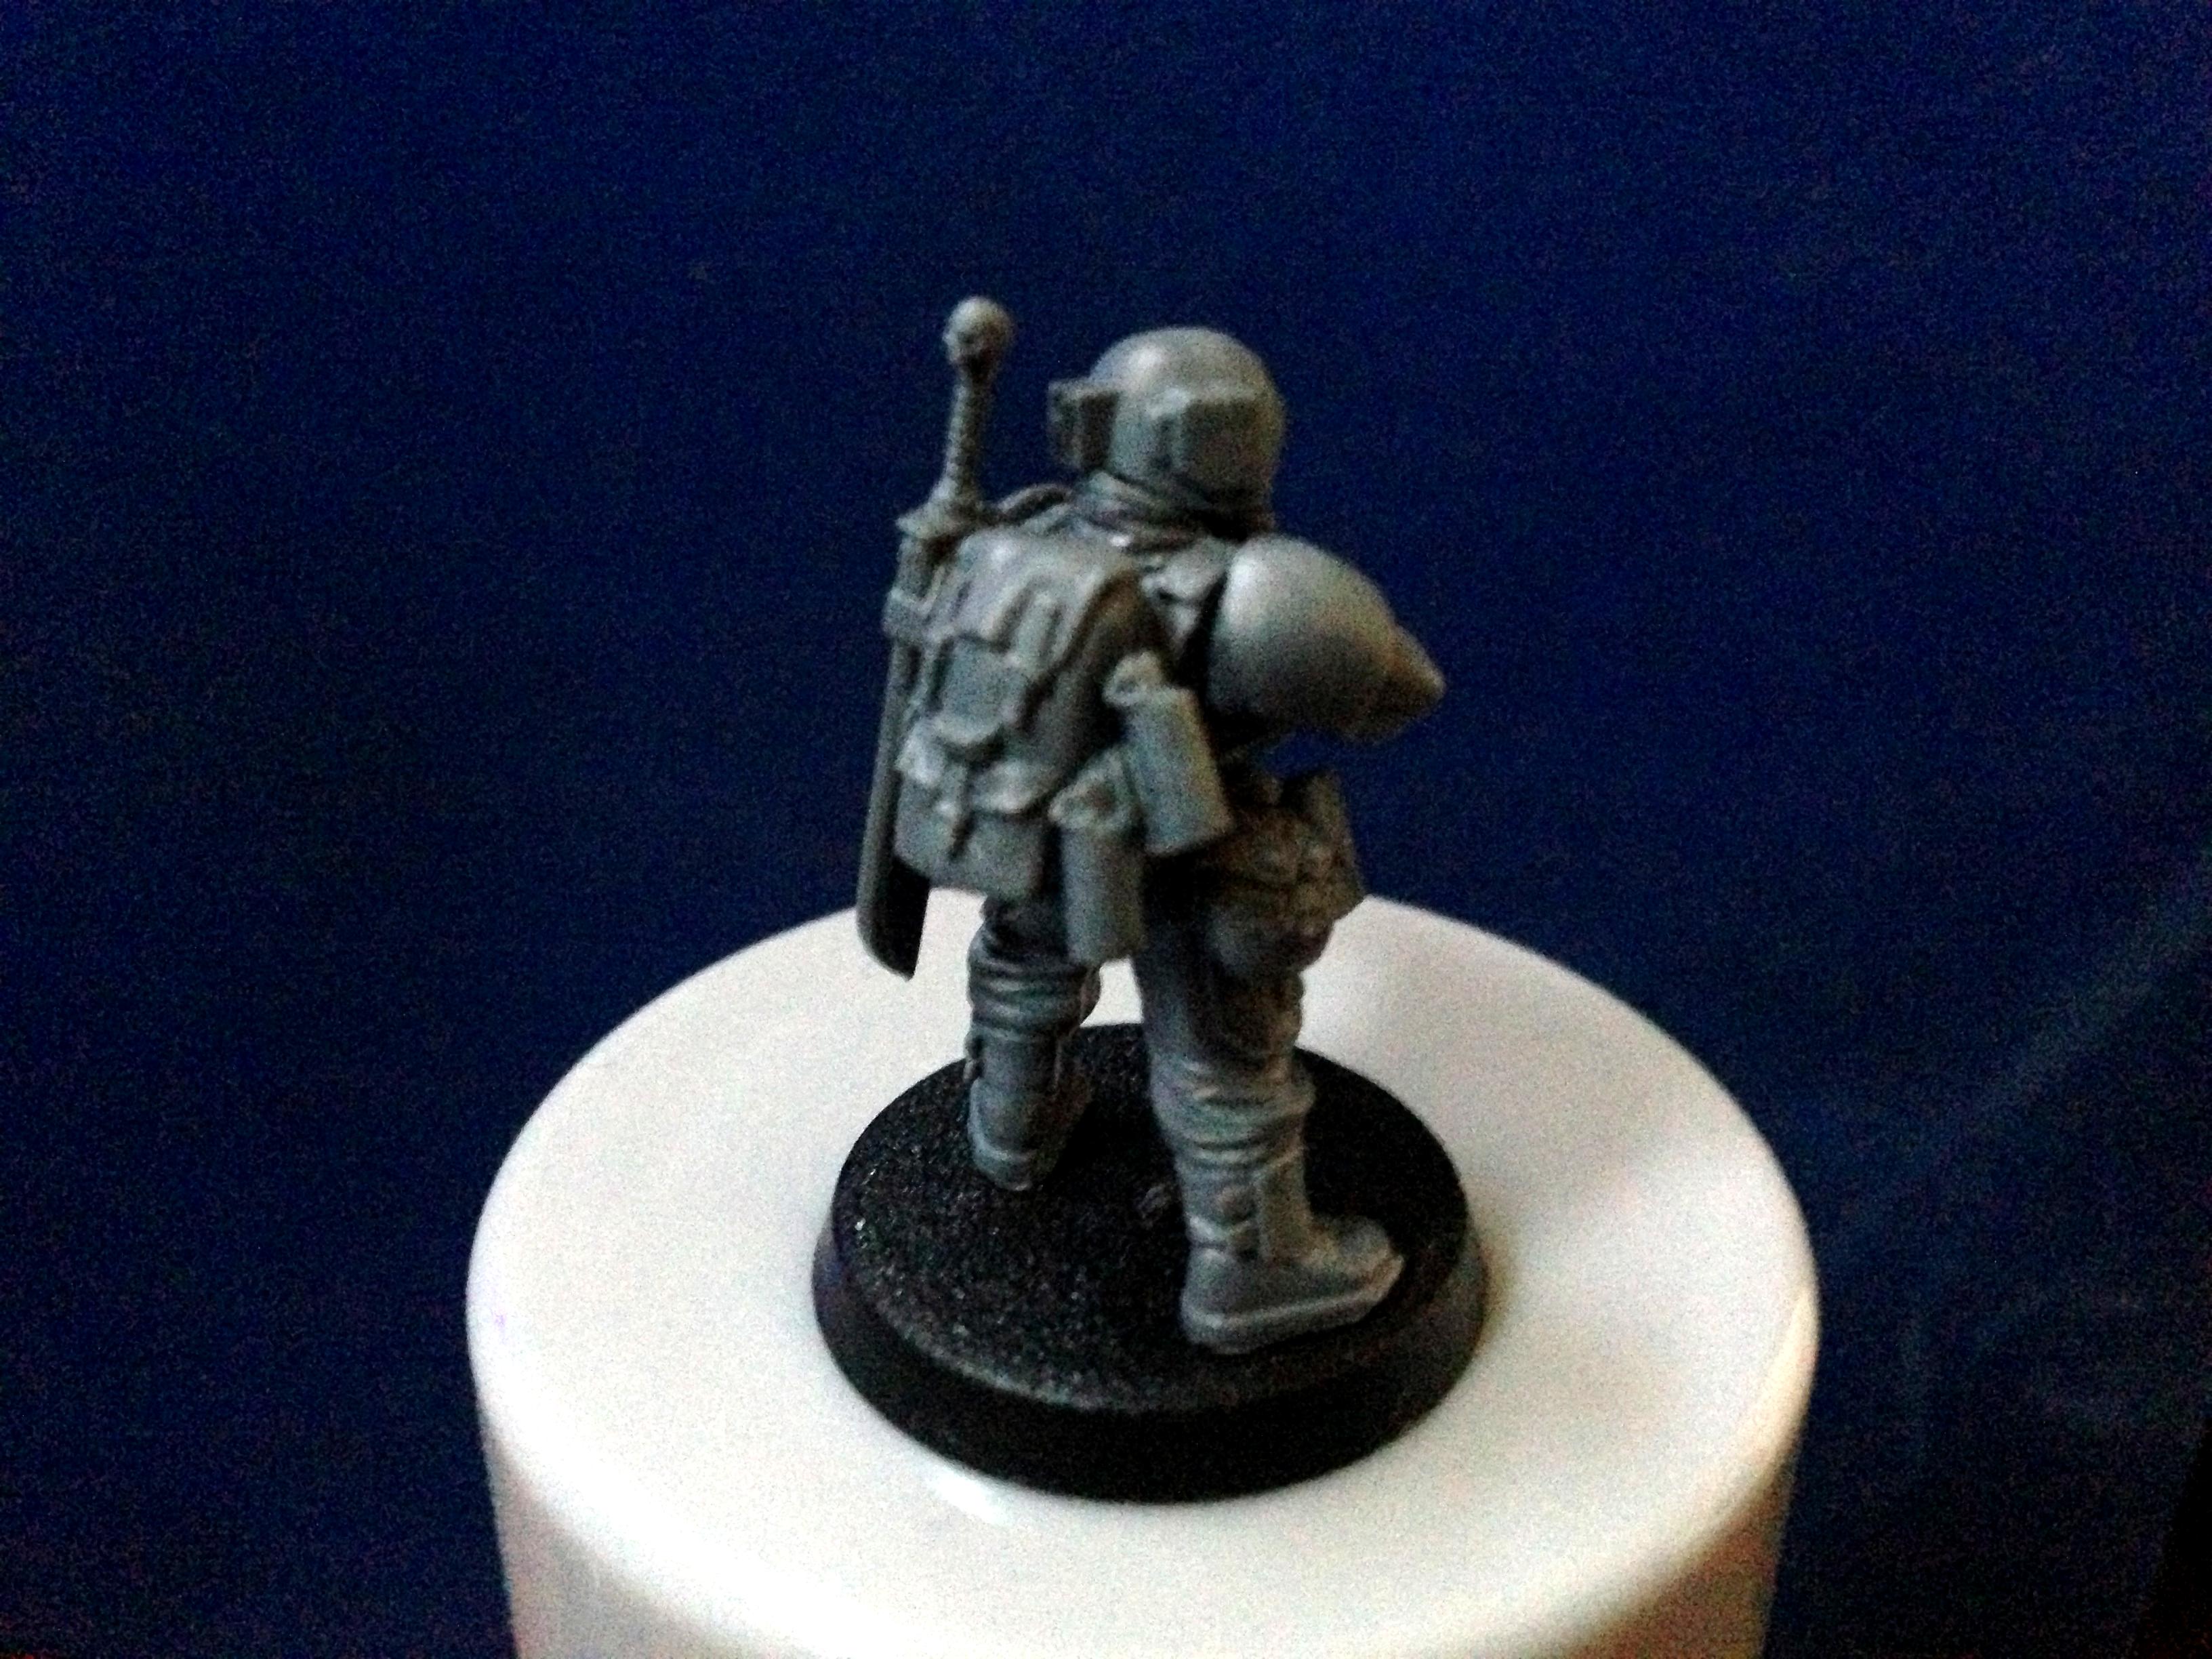 Cadians, Conversion, Imperial Guard, Paratroopers, Special Forces, Spetsnaz, Warhammer 40,000